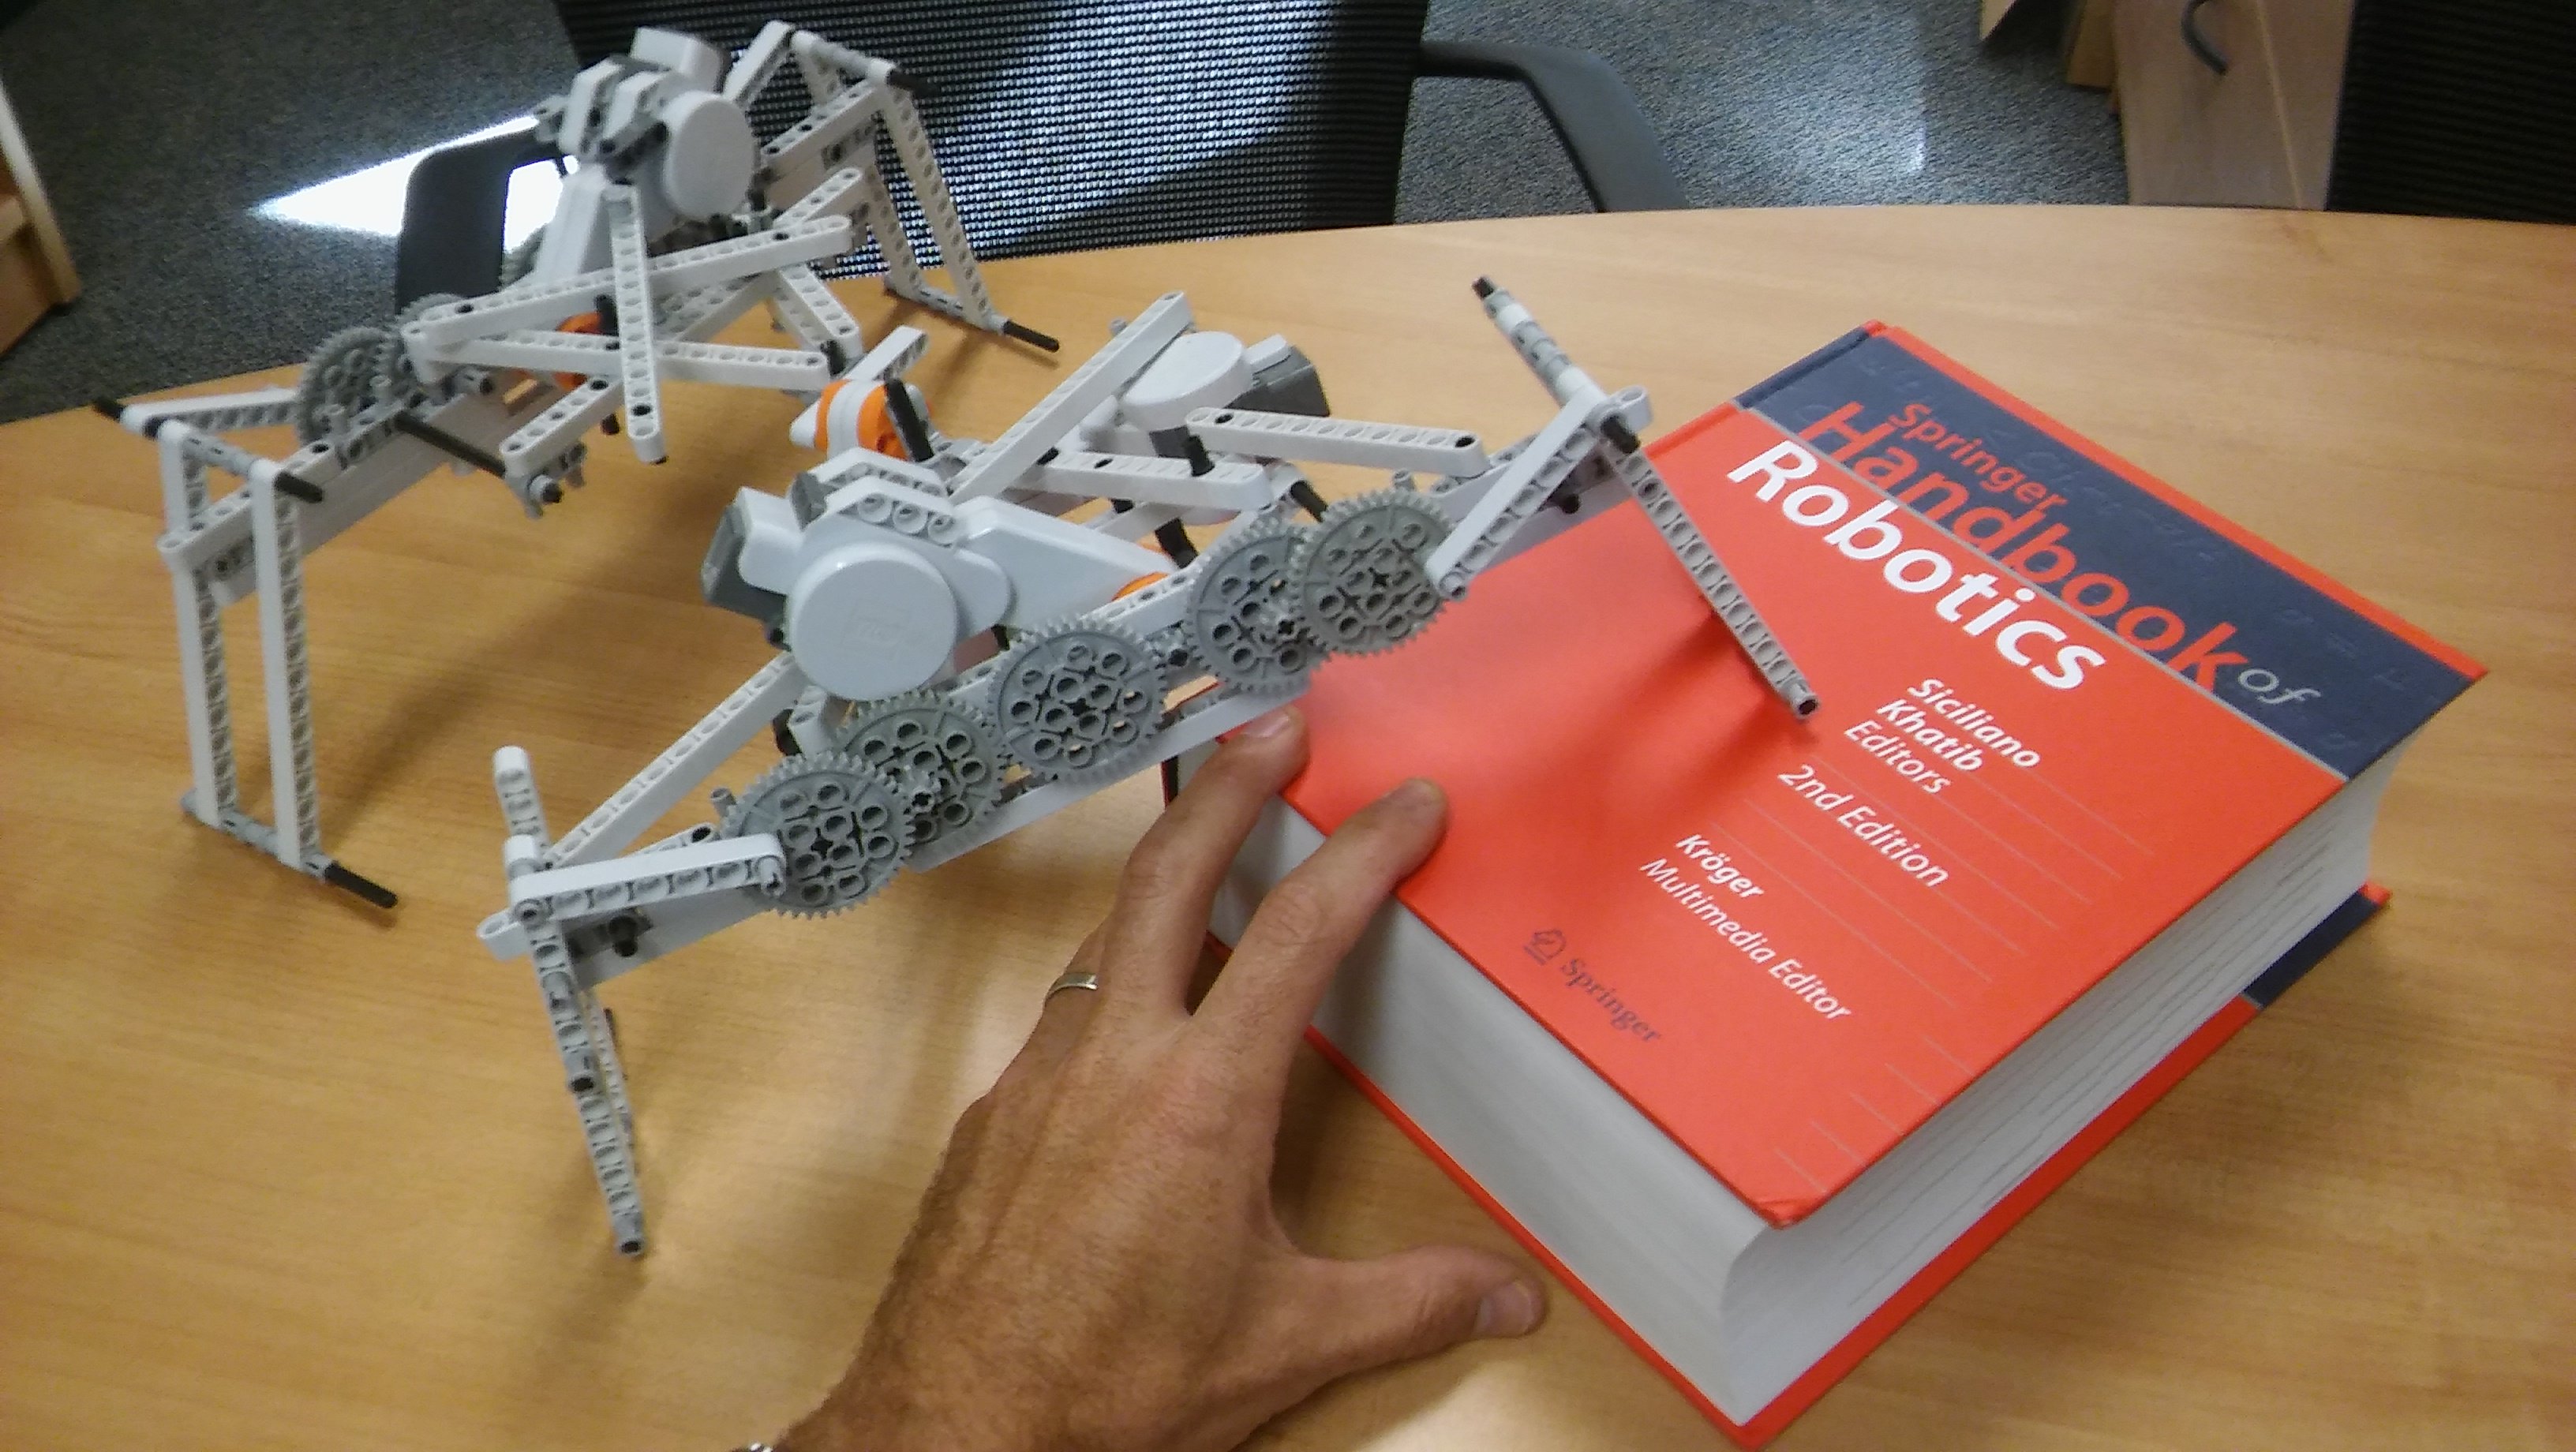 Josh Bongard on "My copy of @springerpub Handbook #Robotics has arrived! A light read at only 2227 pages! https://t.co/fQQjQfNGAw https://t.co/UGiTq56o06" / Twitter